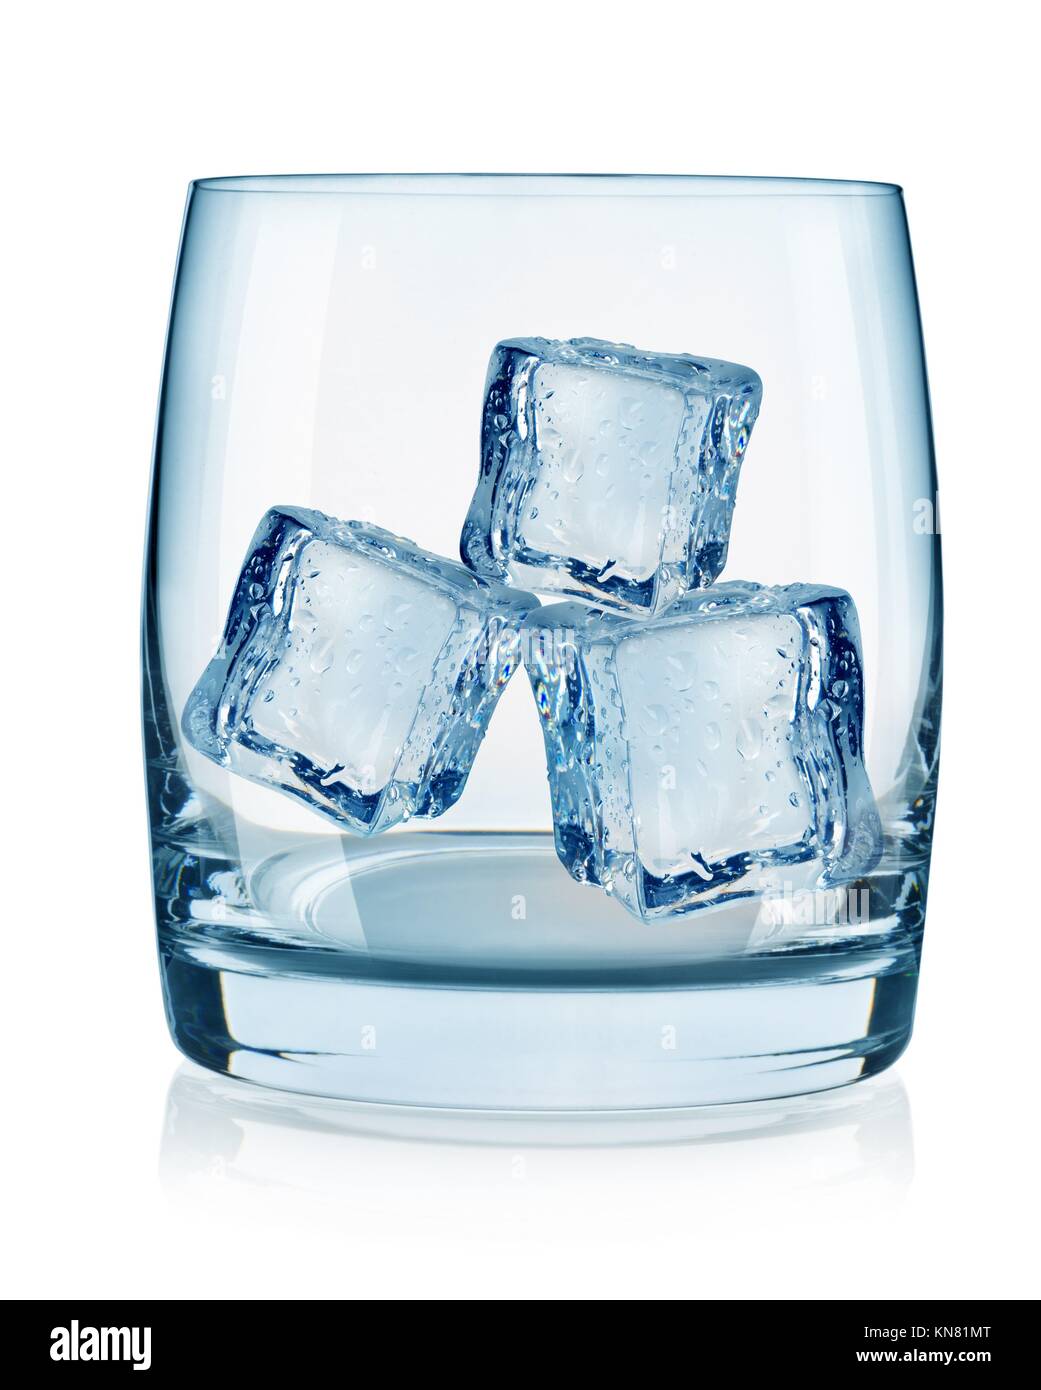 https://c8.alamy.com/comp/KN81MT/glass-and-ice-cubes-isolated-on-white-background-KN81MT.jpg